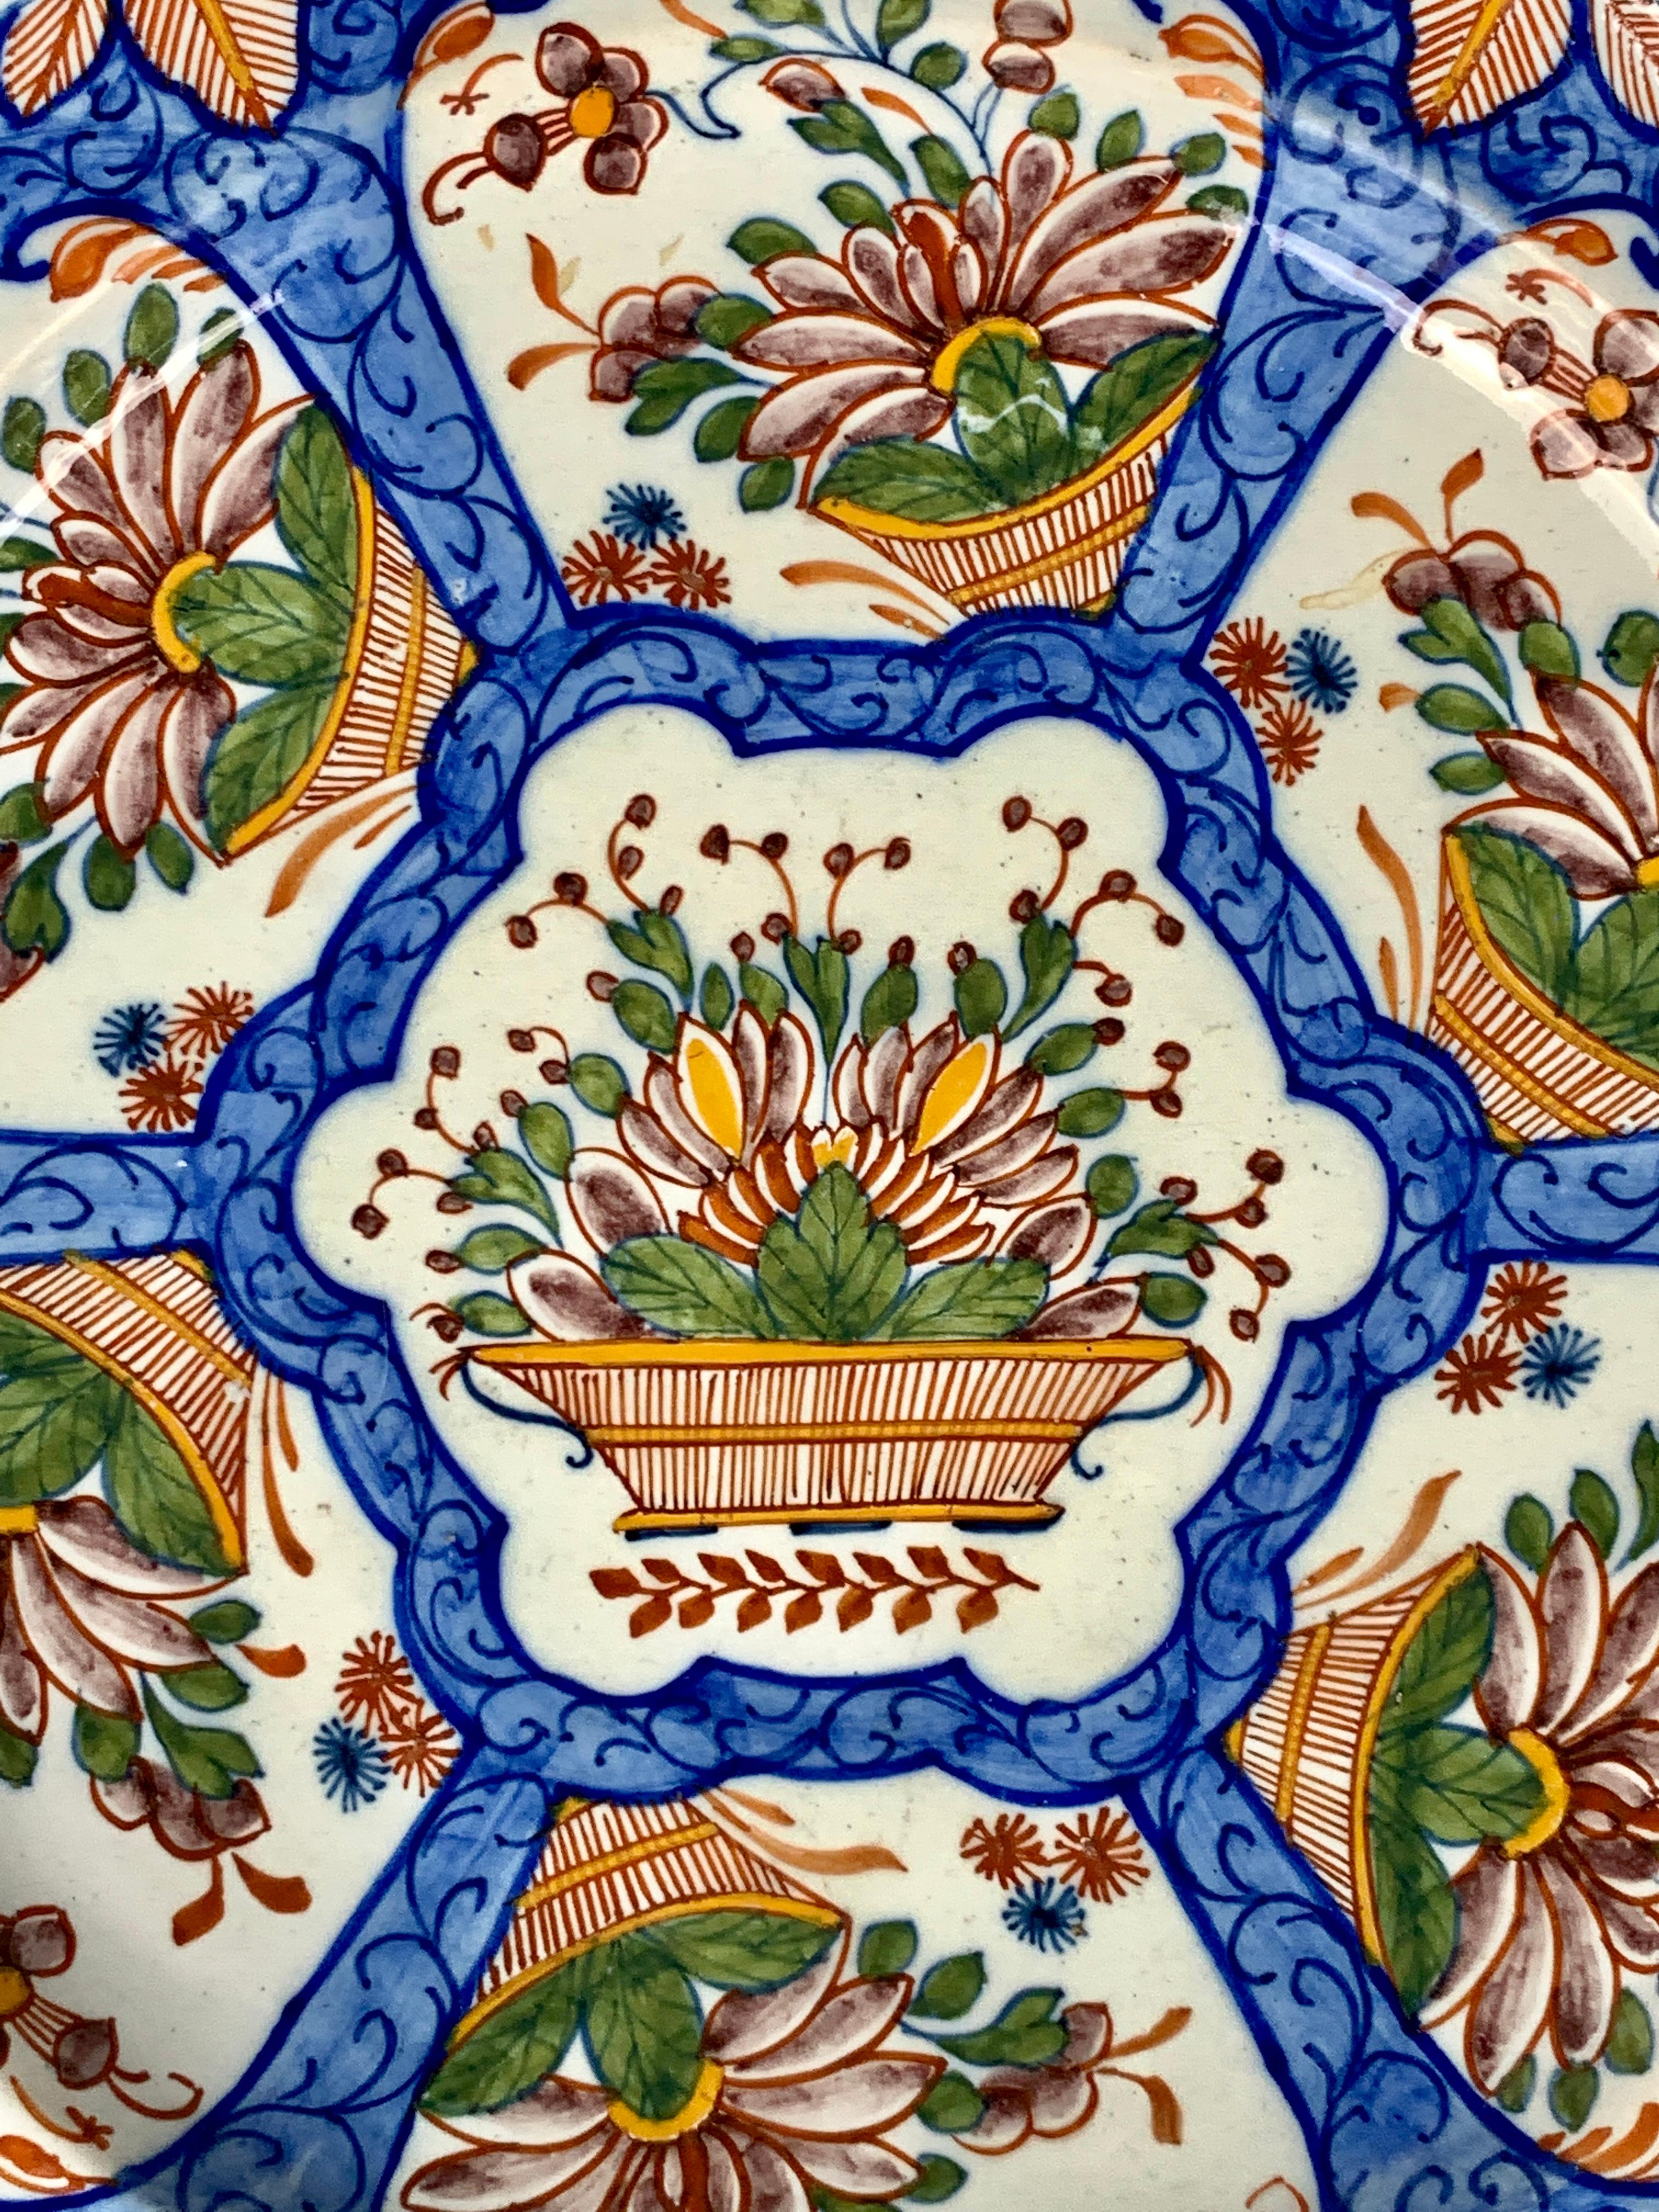 A Dutch Delft charger hand-painted in colorful polychrome. Made in the mid-18th century, the charger shows a traditional Dutch Delft design of a beautiful overflowing flower basket in panels. The panels are separated by an exquisite medium blue